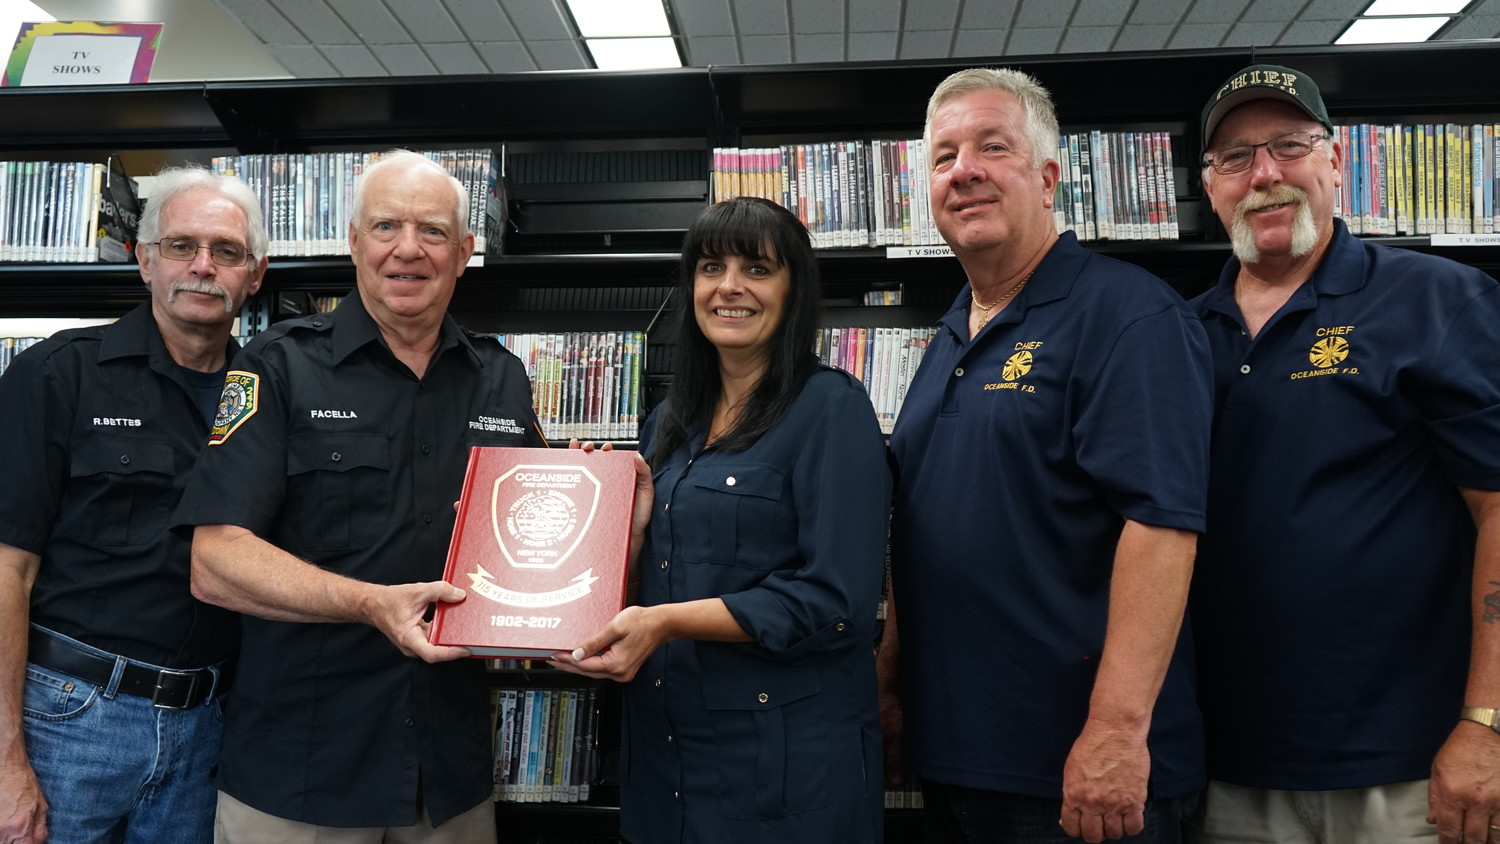 Oceanside firefighters Bob Bettes, left, Paul Facella, Bill Lynch, Fred Robinson and Oceanside Library Director Chris Marra with a copy of their history of the Oceanside Fire Department donated to the library for future generations of Oceanside history lovers to enjoy.